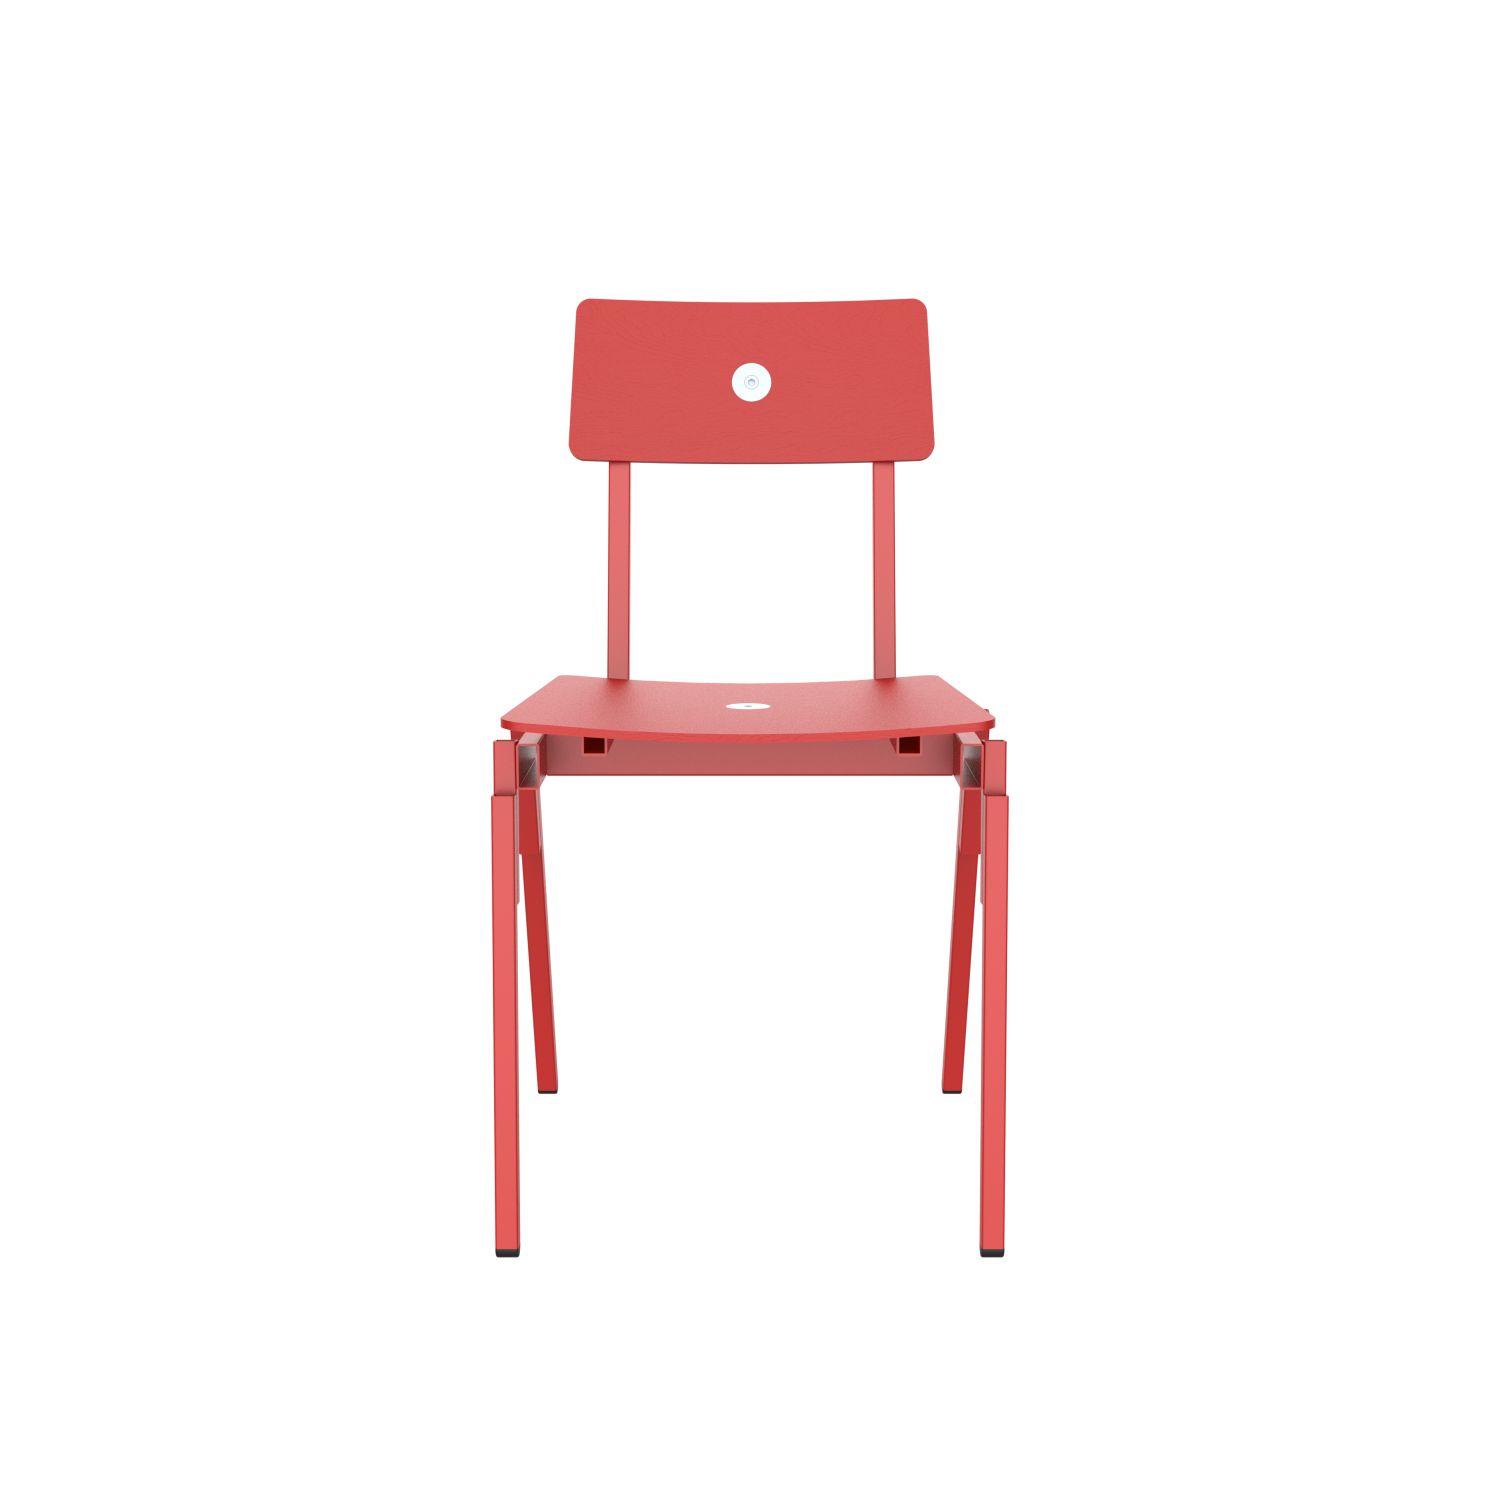 lensvelt piet hein eek mitw wooden chair without armrests traffic red ral3020 traffic red ral3020 hard leg ends